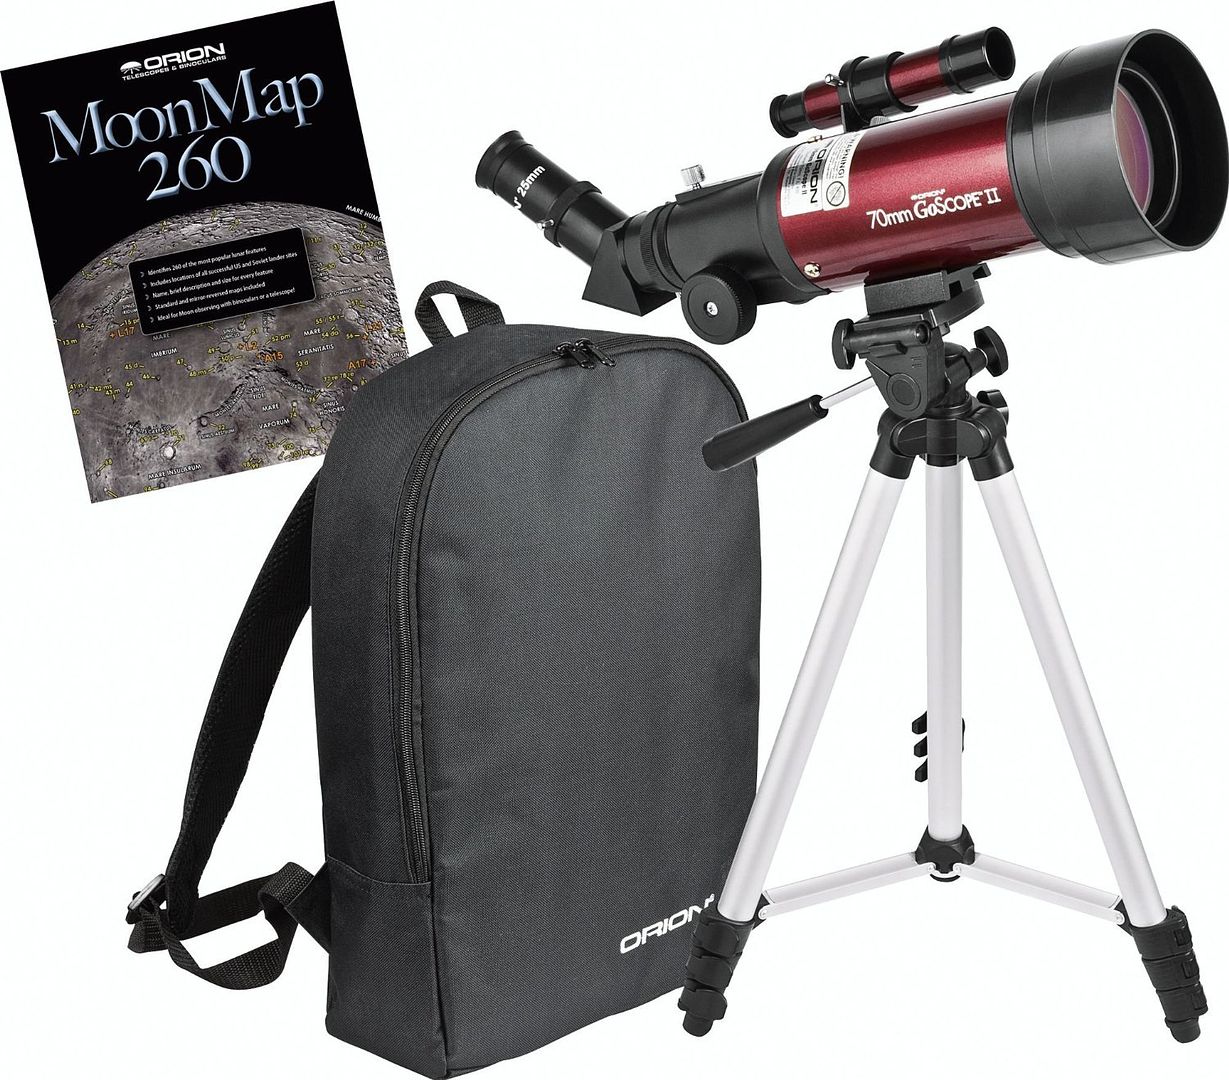 Cool STEM toys and gifts for kids: Orion travel telescope moon kit